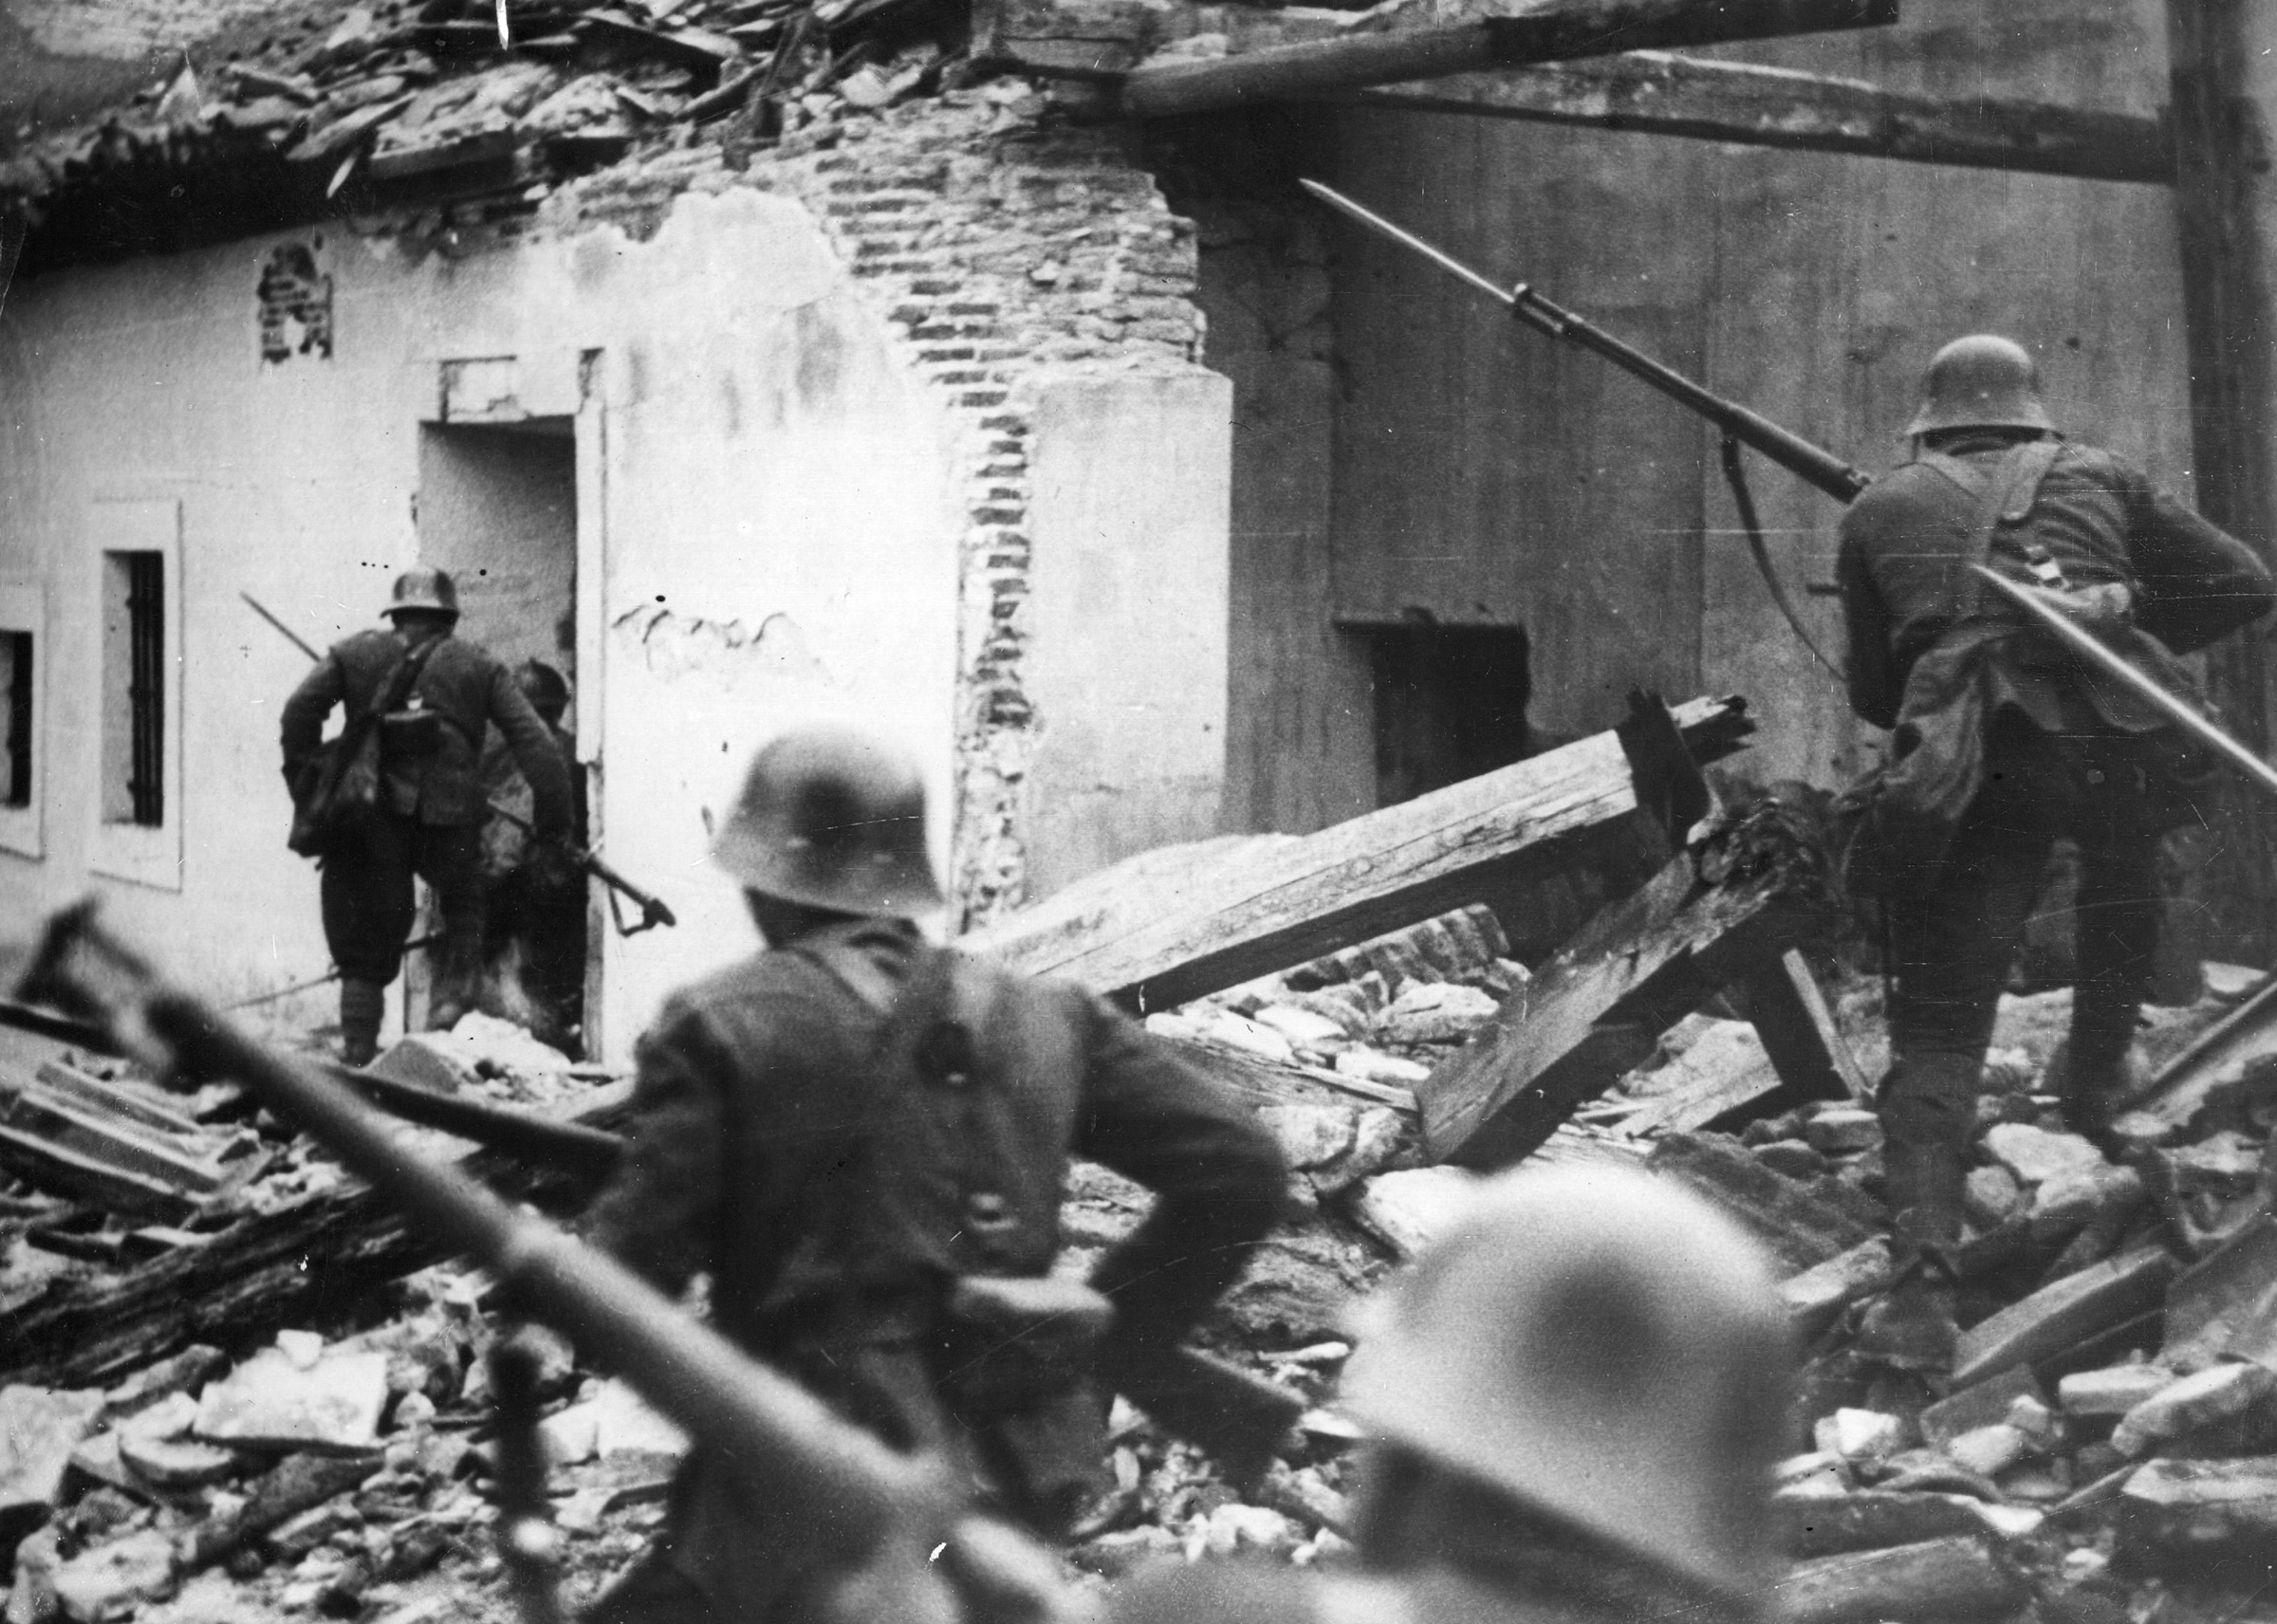 Nationalist troops advance through the debris of houses wrecked in air raids in Madrid, on April 2, 1937.